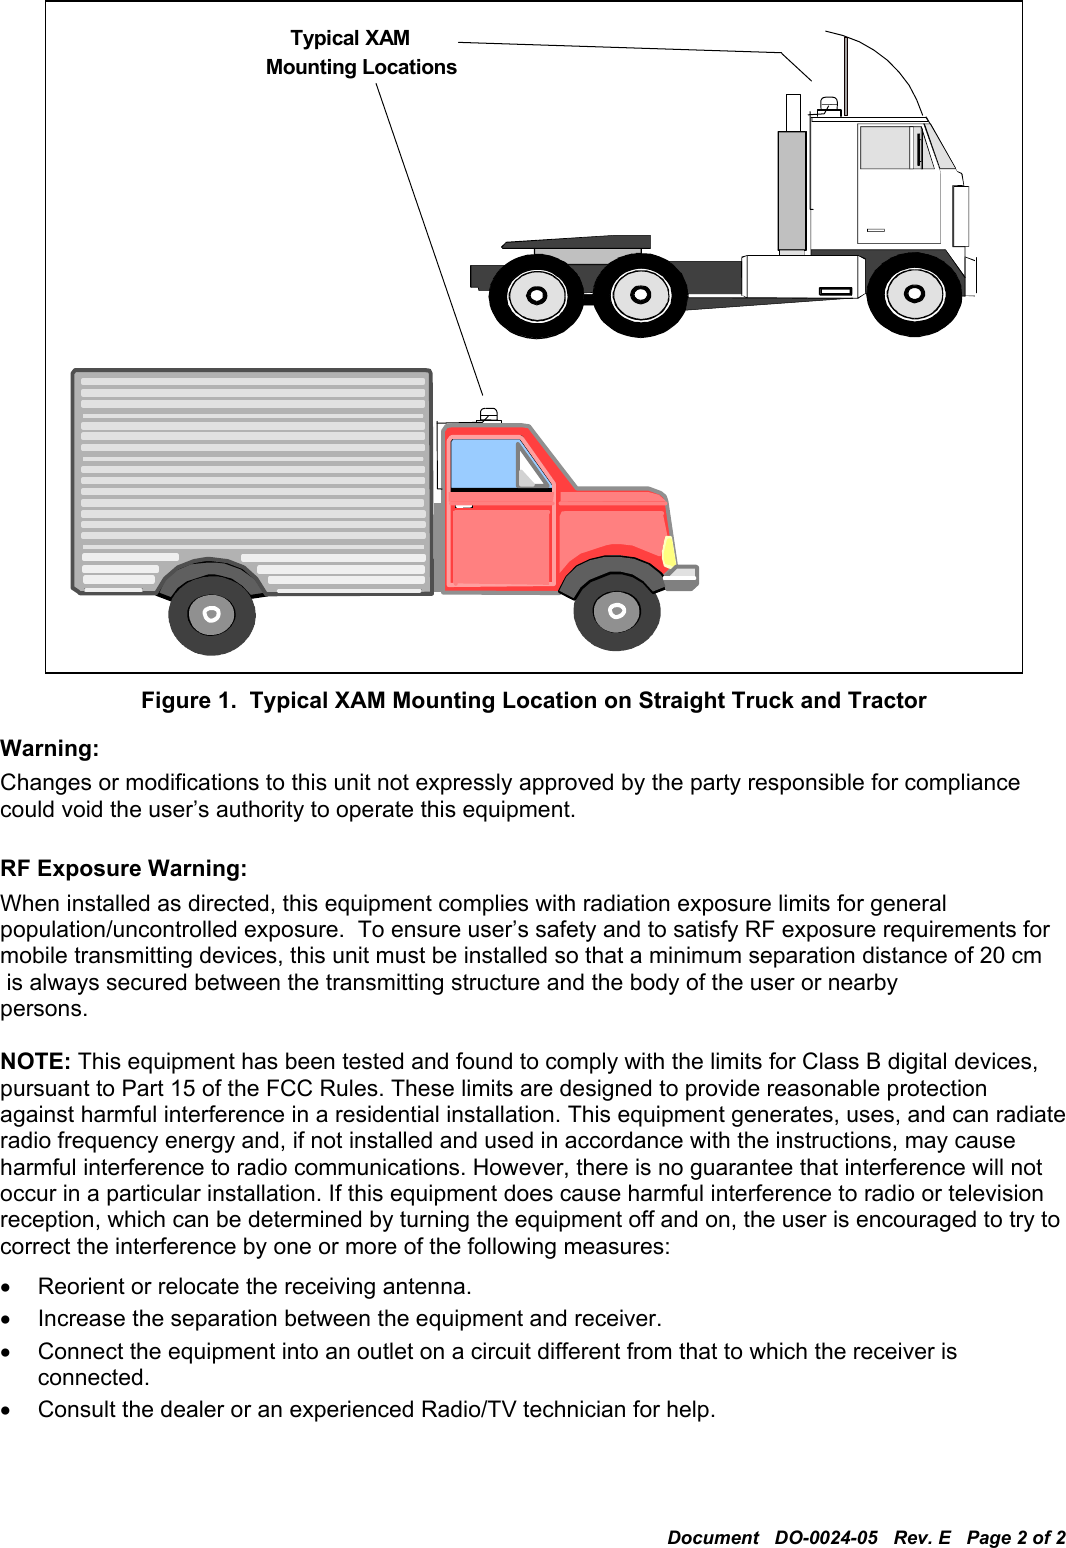 Document   DO-0024-05   Rev. E   Page 2 of 2  Mounting Locations Typical XAM   Figure 1.  Typical XAM Mounting Location on Straight Truck and Tractor Warning: Changes or modifications to this unit not expressly approved by the party responsible for compliance could void the user’s authority to operate this equipment.  RF Exposure Warning: When installed as directed, this equipment complies with radiation exposure limits for general population/uncontrolled exposure.  To ensure user’s safety and to satisfy RF exposure requirements for mobile transmitting devices, this unit must be installed so that a minimum separation distance of 20 cm  is always secured between the transmitting structure and the body of the user or nearby persons.  NOTE: This equipment has been tested and found to comply with the limits for Class B digital devices, pursuant to Part 15 of the FCC Rules. These limits are designed to provide reasonable protection against harmful interference in a residential installation. This equipment generates, uses, and can radiate radio frequency energy and, if not installed and used in accordance with the instructions, may cause harmful interference to radio communications. However, there is no guarantee that interference will not occur in a particular installation. If this equipment does cause harmful interference to radio or television reception, which can be determined by turning the equipment off and on, the user is encouraged to try to correct the interference by one or more of the following measures: •  Reorient or relocate the receiving antenna. •  Increase the separation between the equipment and receiver. •  Connect the equipment into an outlet on a circuit different from that to which the receiver is connected. •  Consult the dealer or an experienced Radio/TV technician for help. 